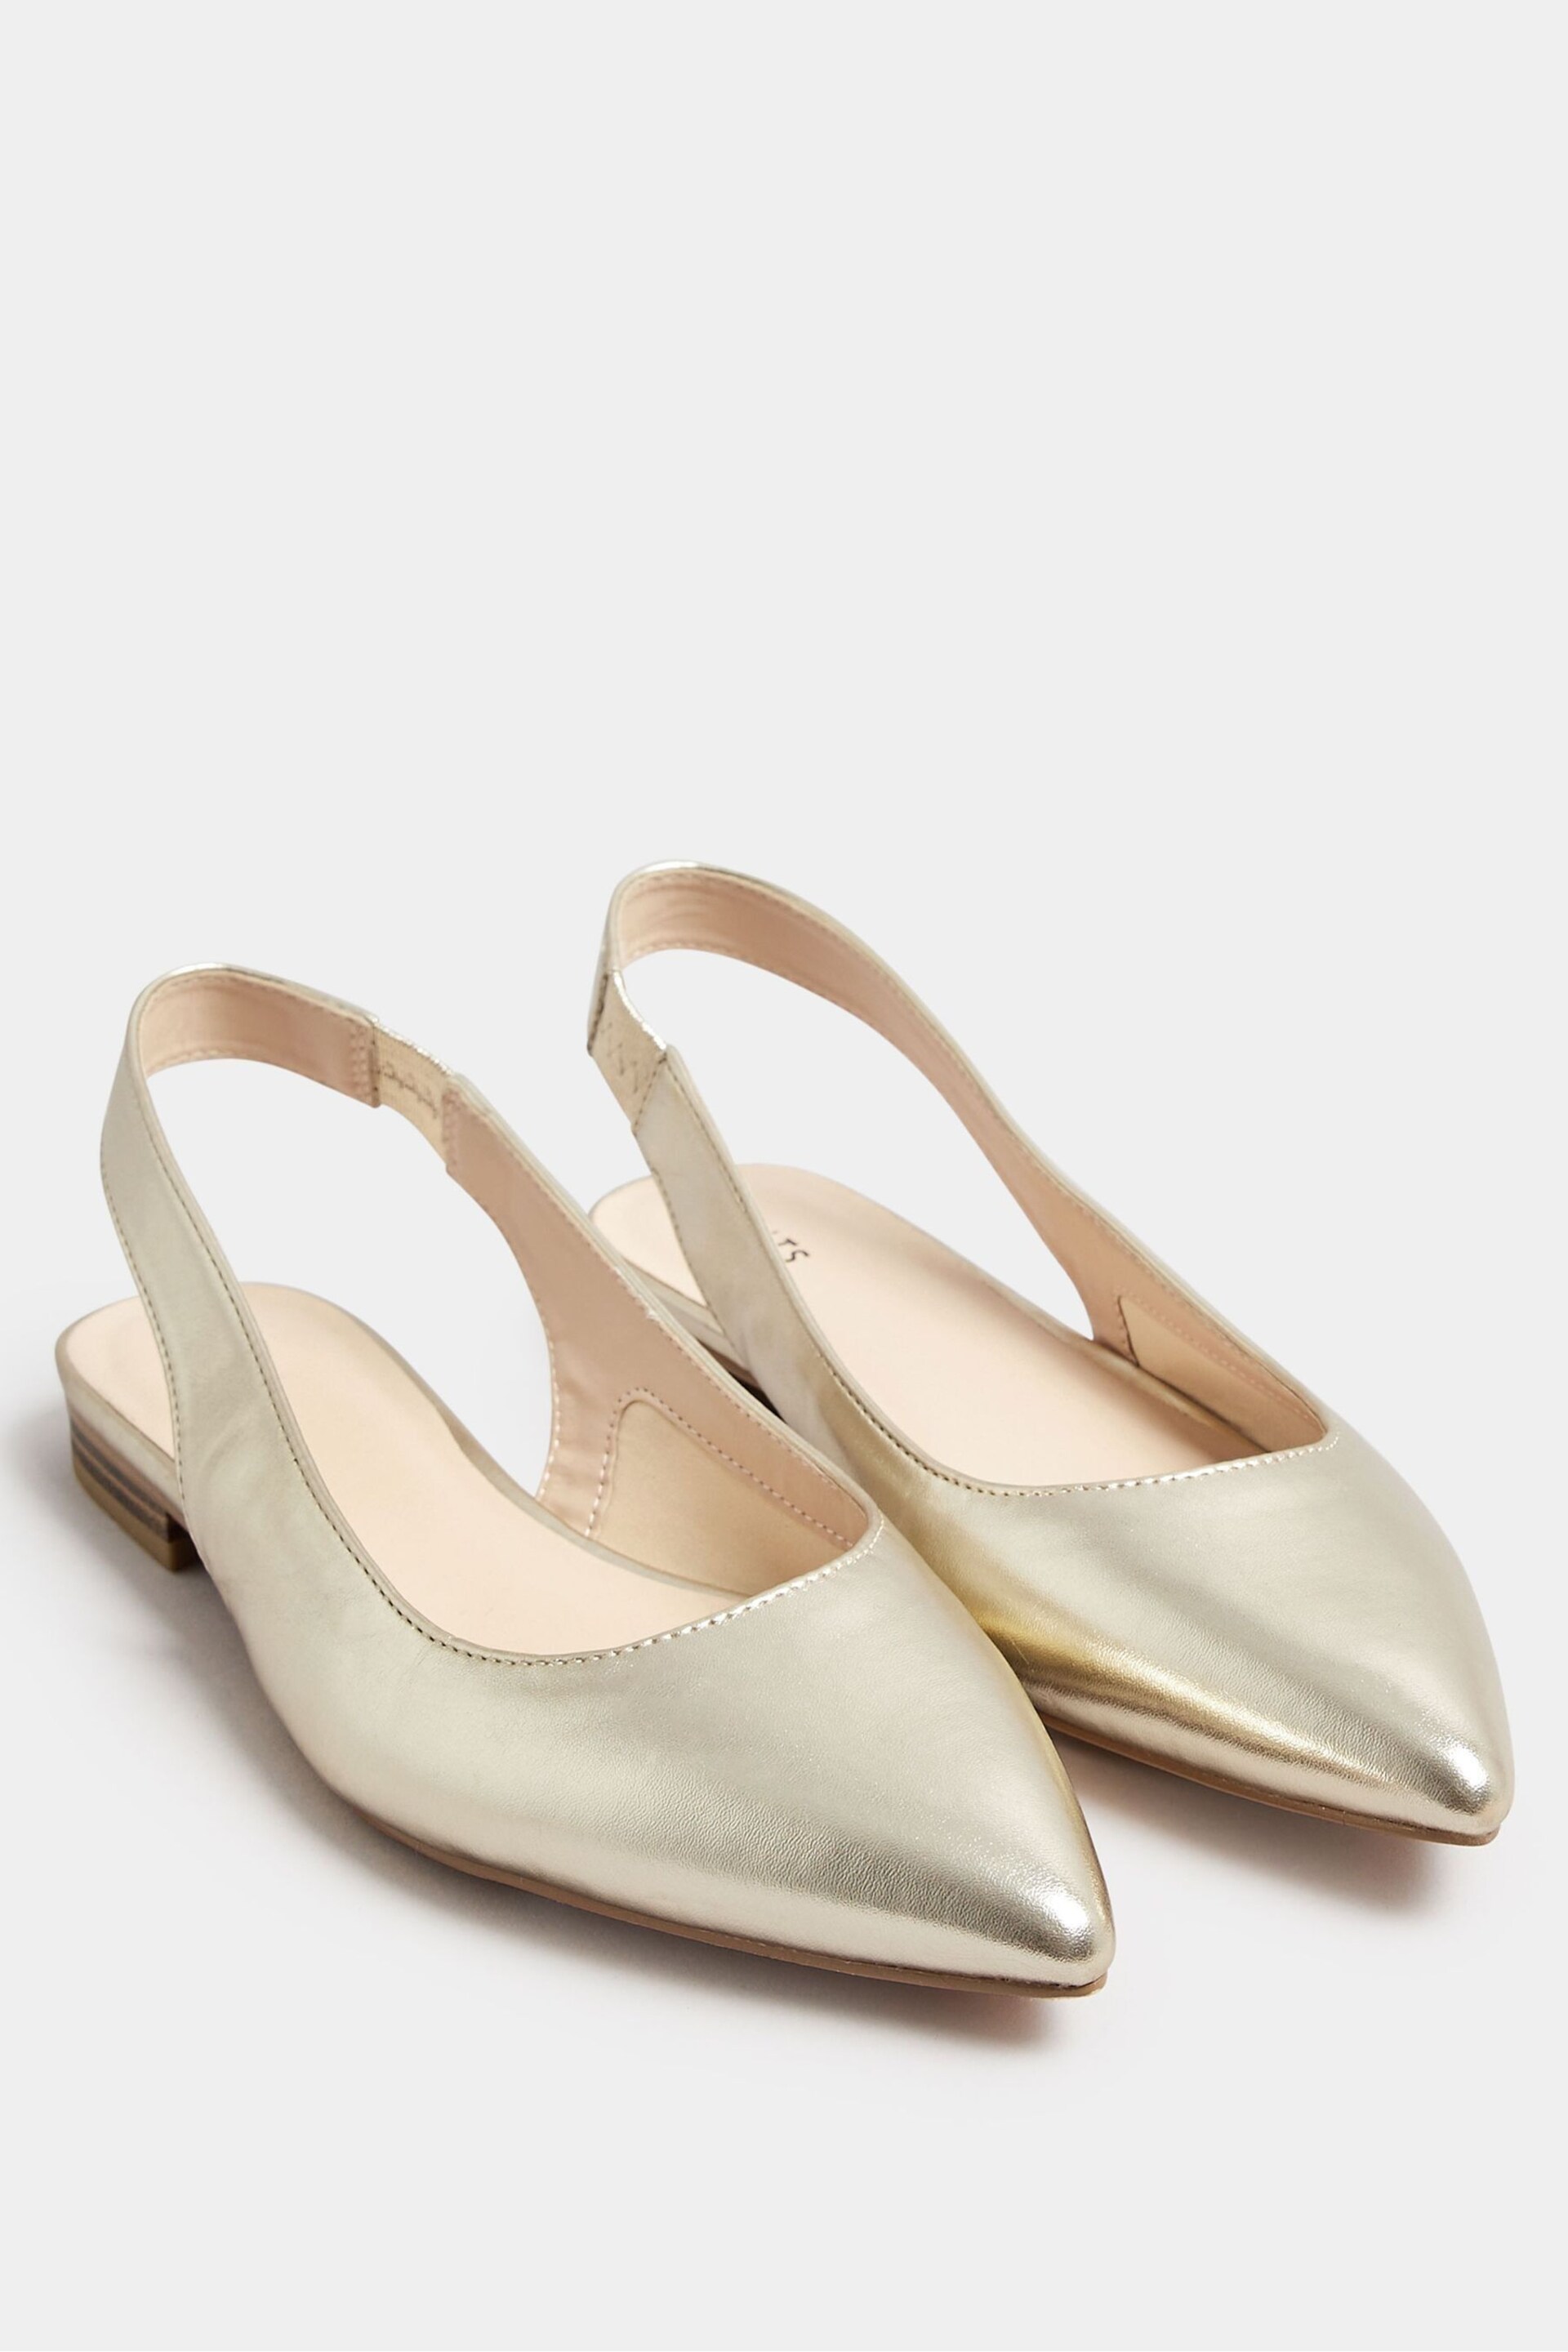 Long Tall Sally Gold Flat Point Slingback Shoes - Image 3 of 5